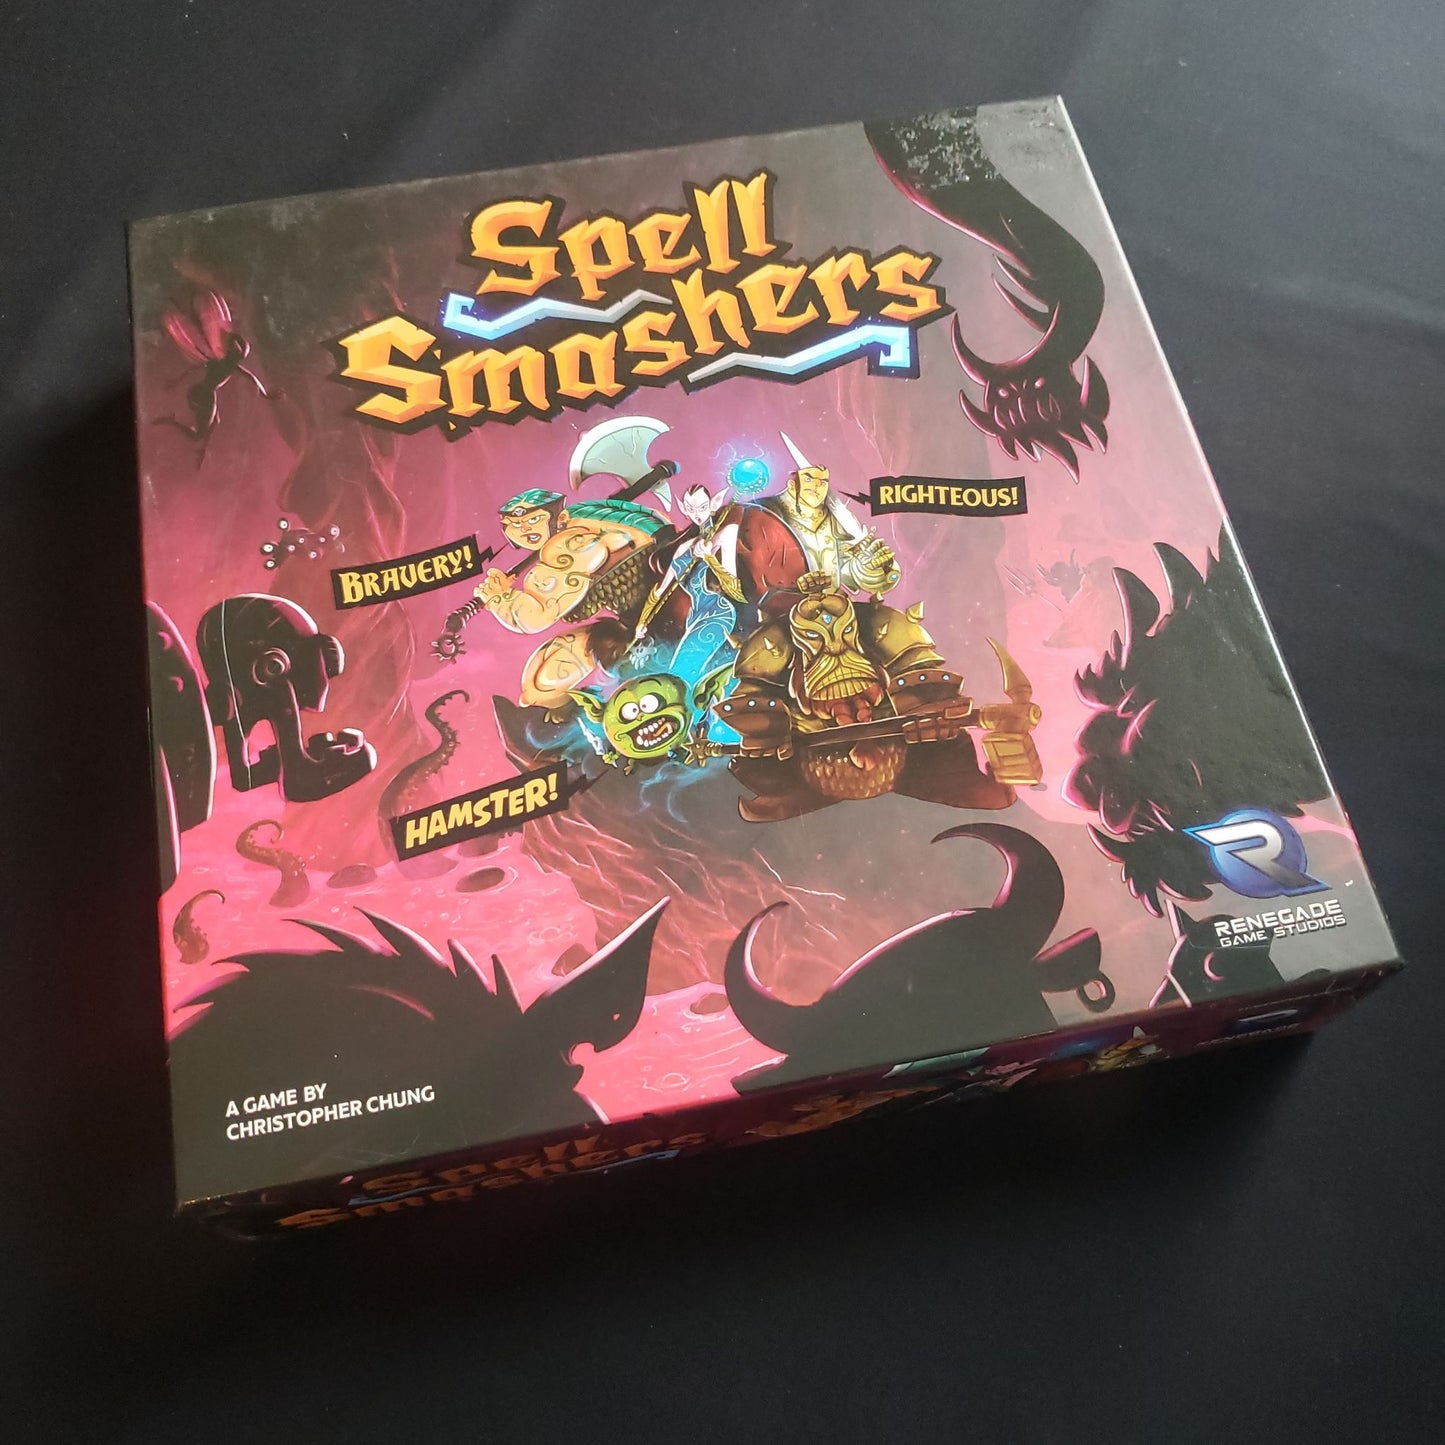 Image shows the front cover of the box of the Spell Smashers board game